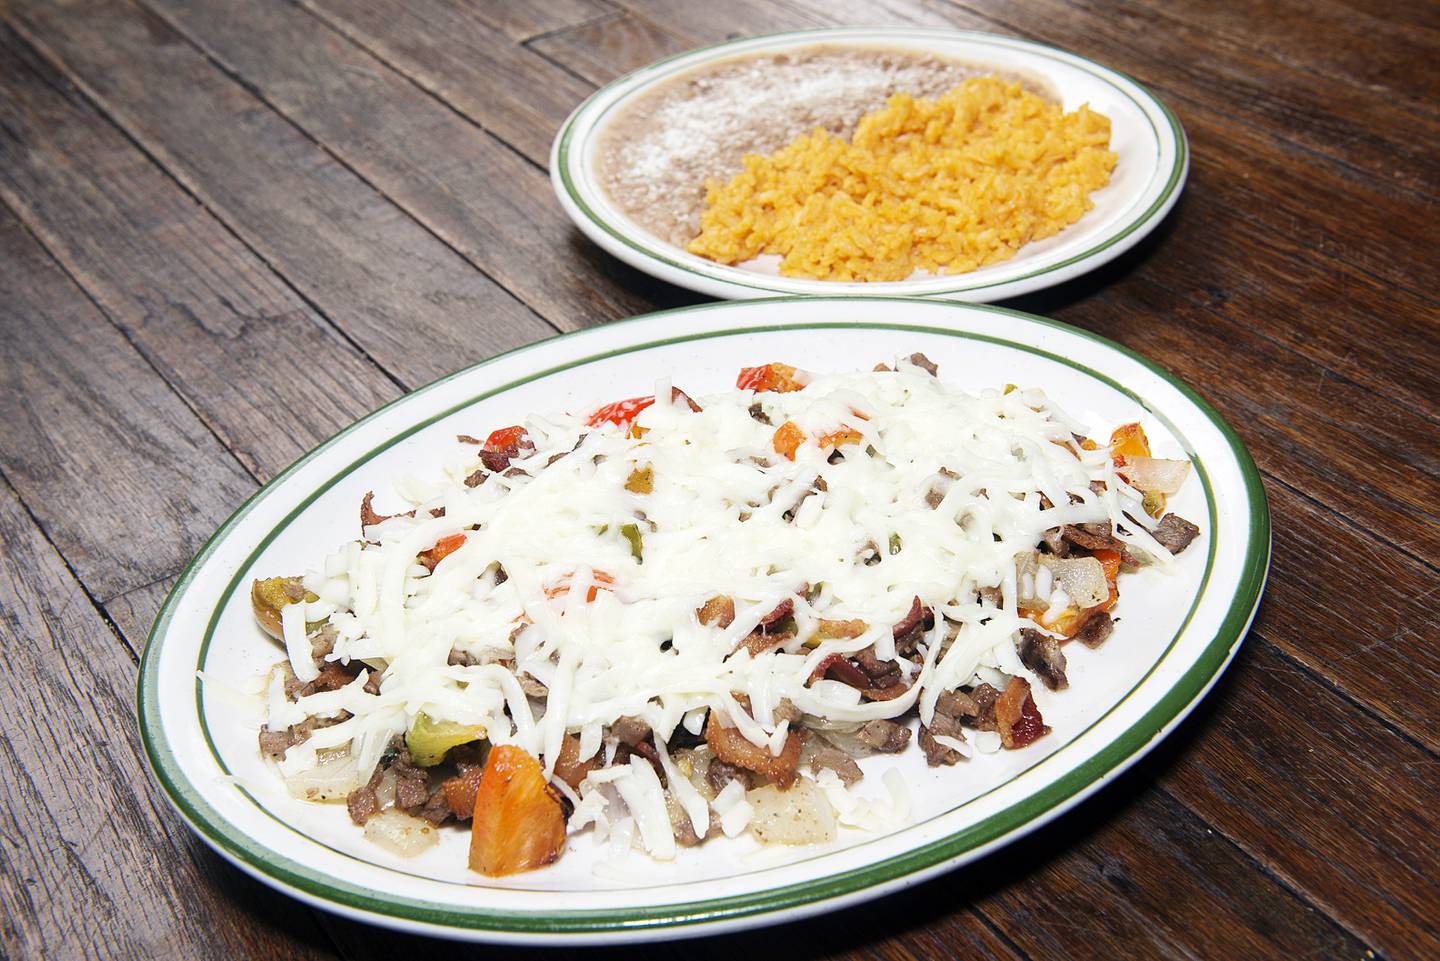 On the menu are the staples, such as burritos, tacos and enchiladas, but other dishes, such as allambre — chopped steak cubes, bacon, onion and bell peppers topped with chihuahua cheese, shown here with a side of rice and beans.